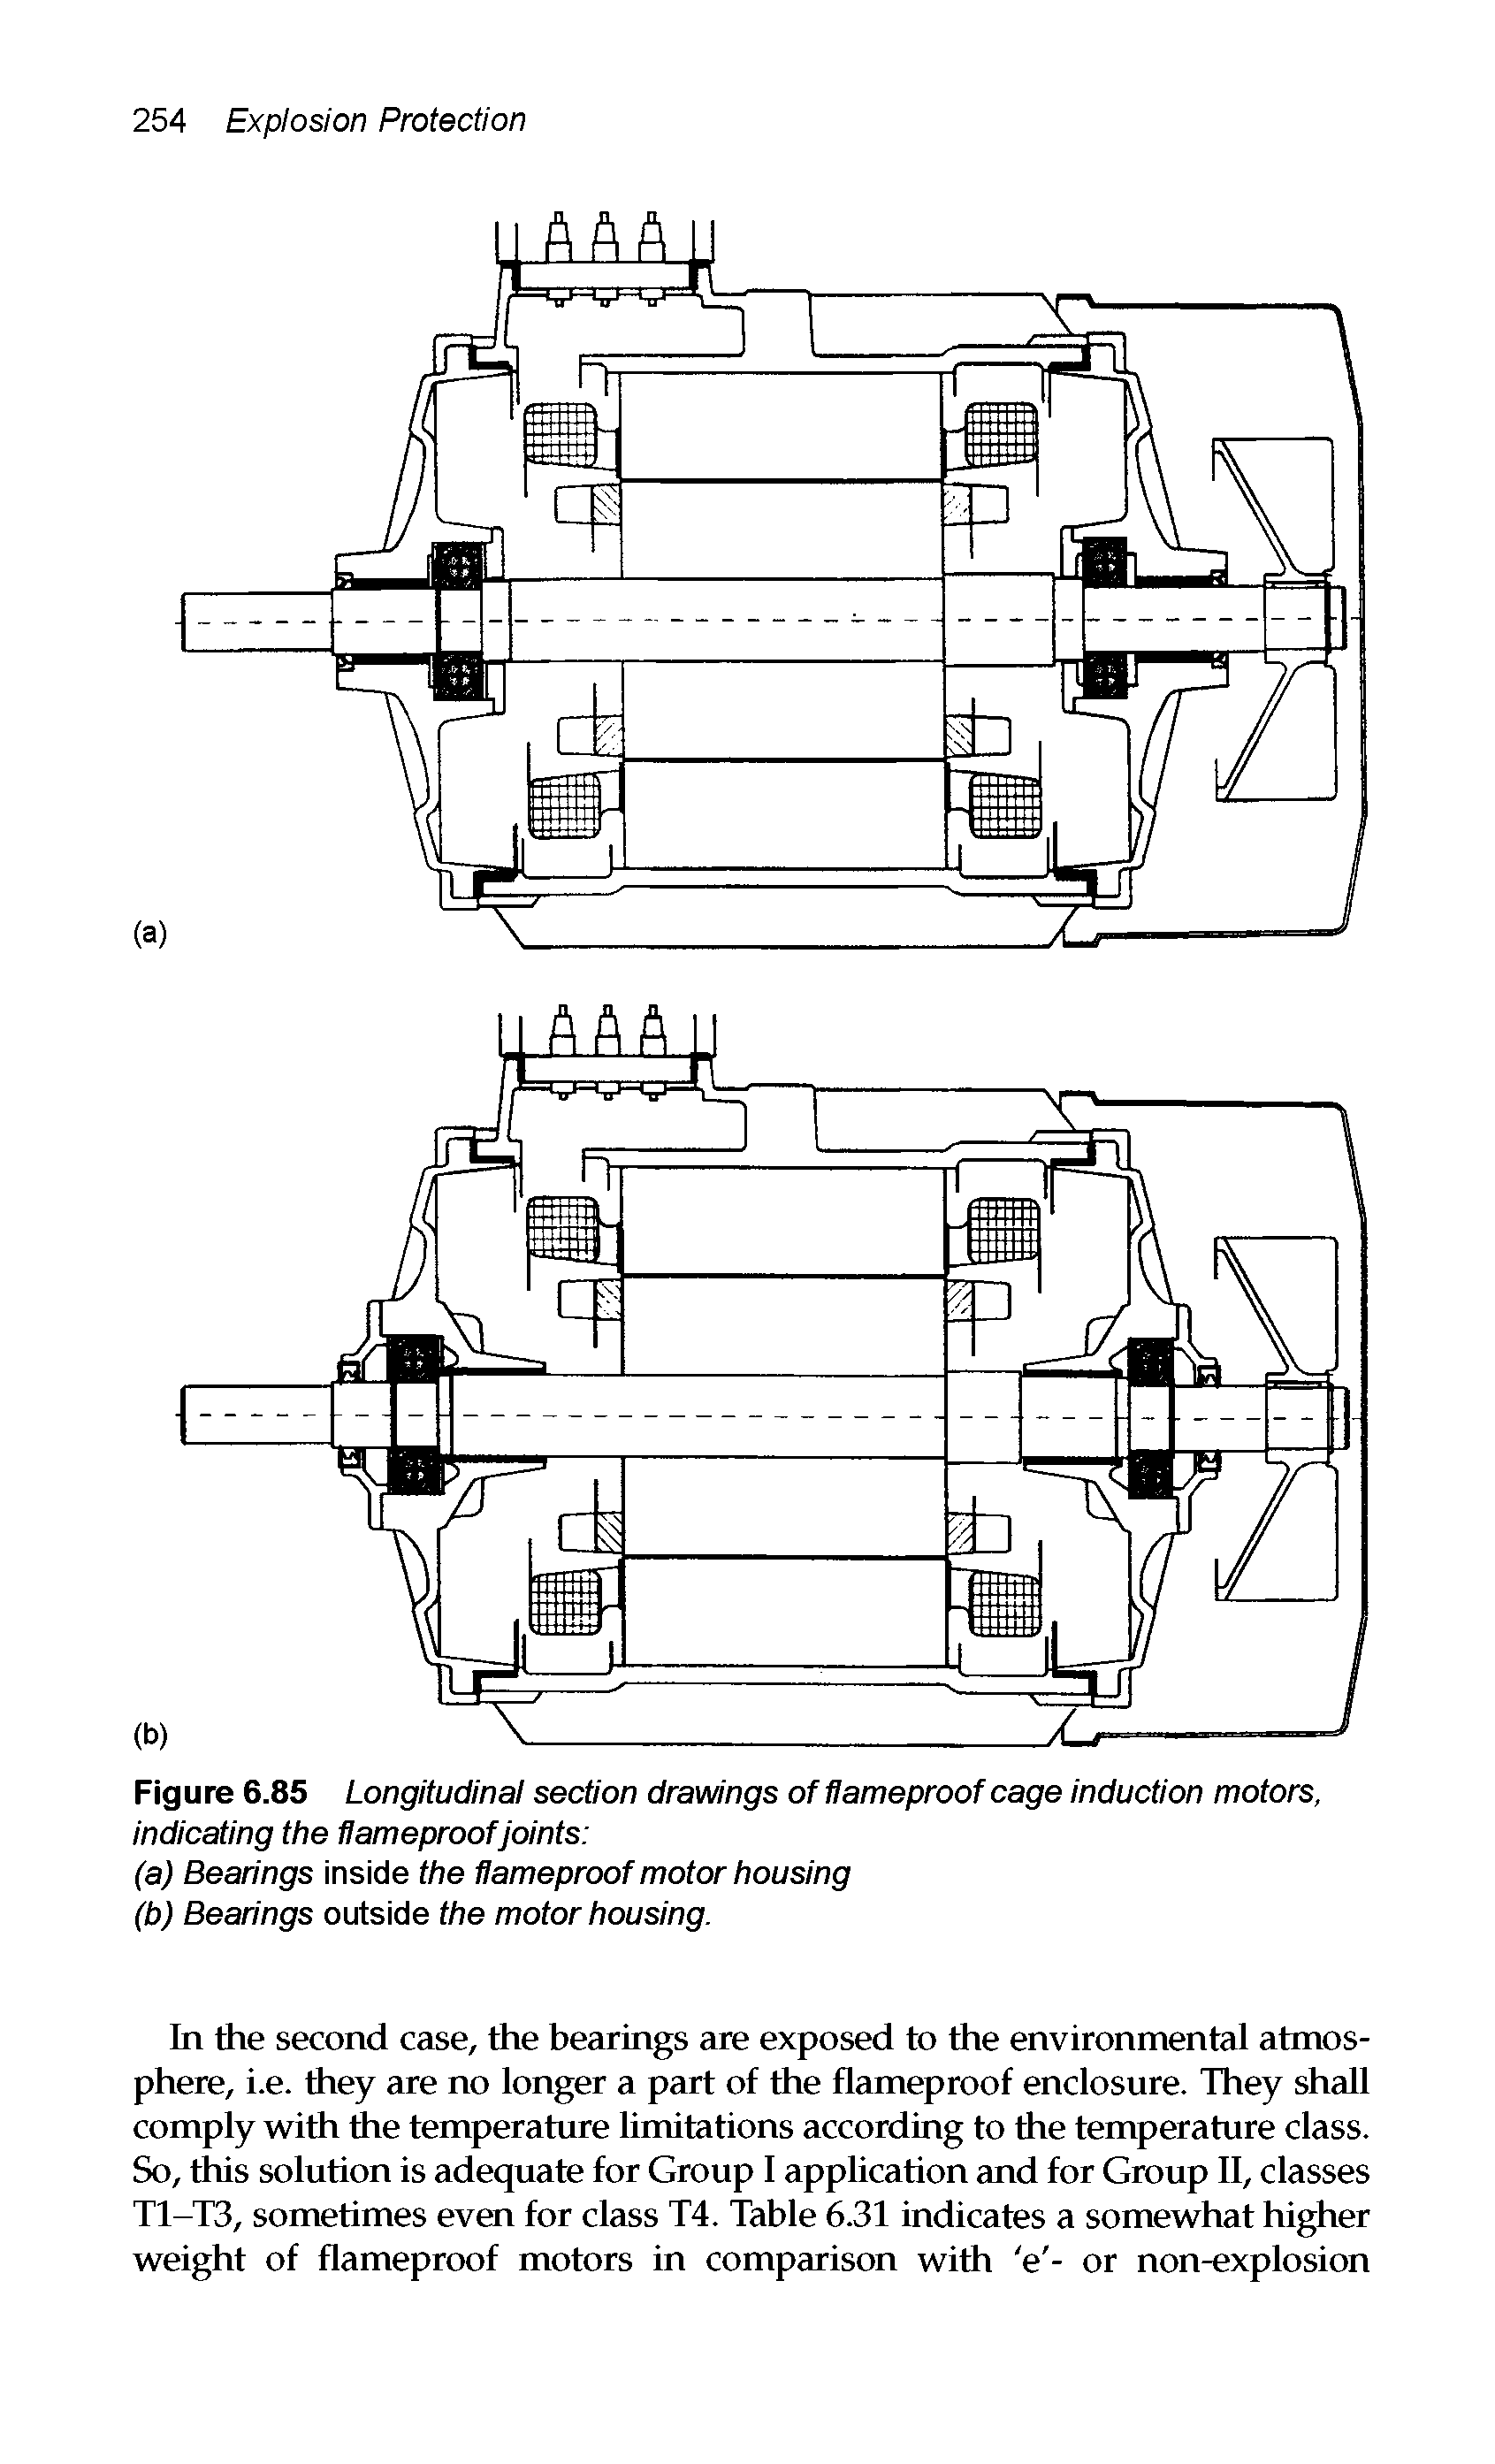 Figure 6.85 Longitudinal section drawings of flameproof cage induction motors, indicating the flameproof joints ...